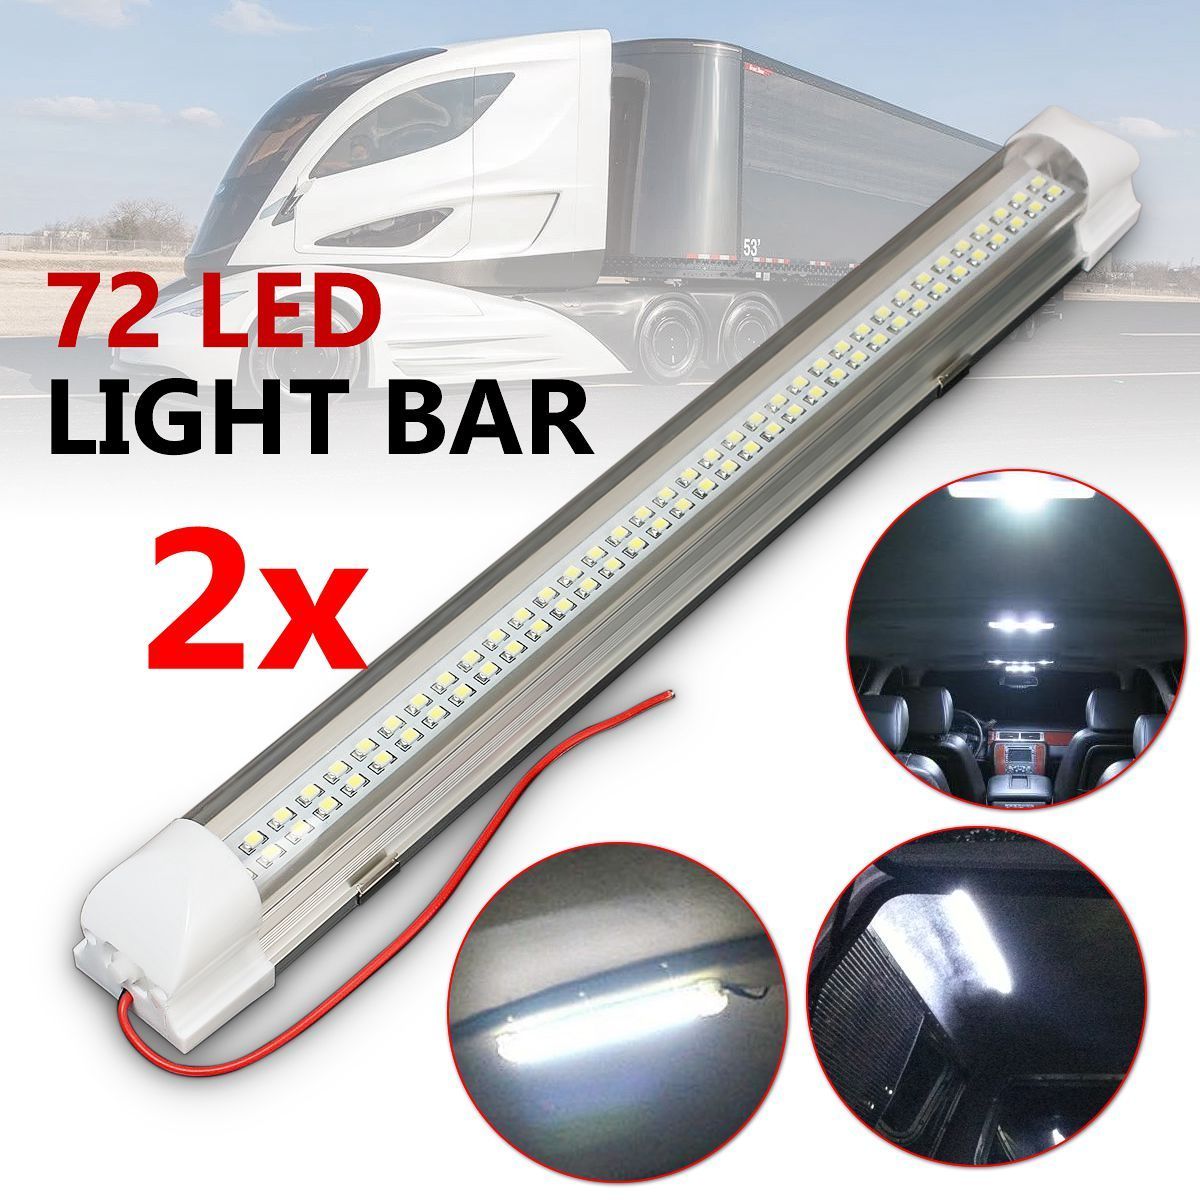 Universal-Interior-34cm-LED-Light-Strip-Lamp-White-2Pcs-with-ONOFF-Switch-for-Car-Auto-Caravan-Bus-1406588